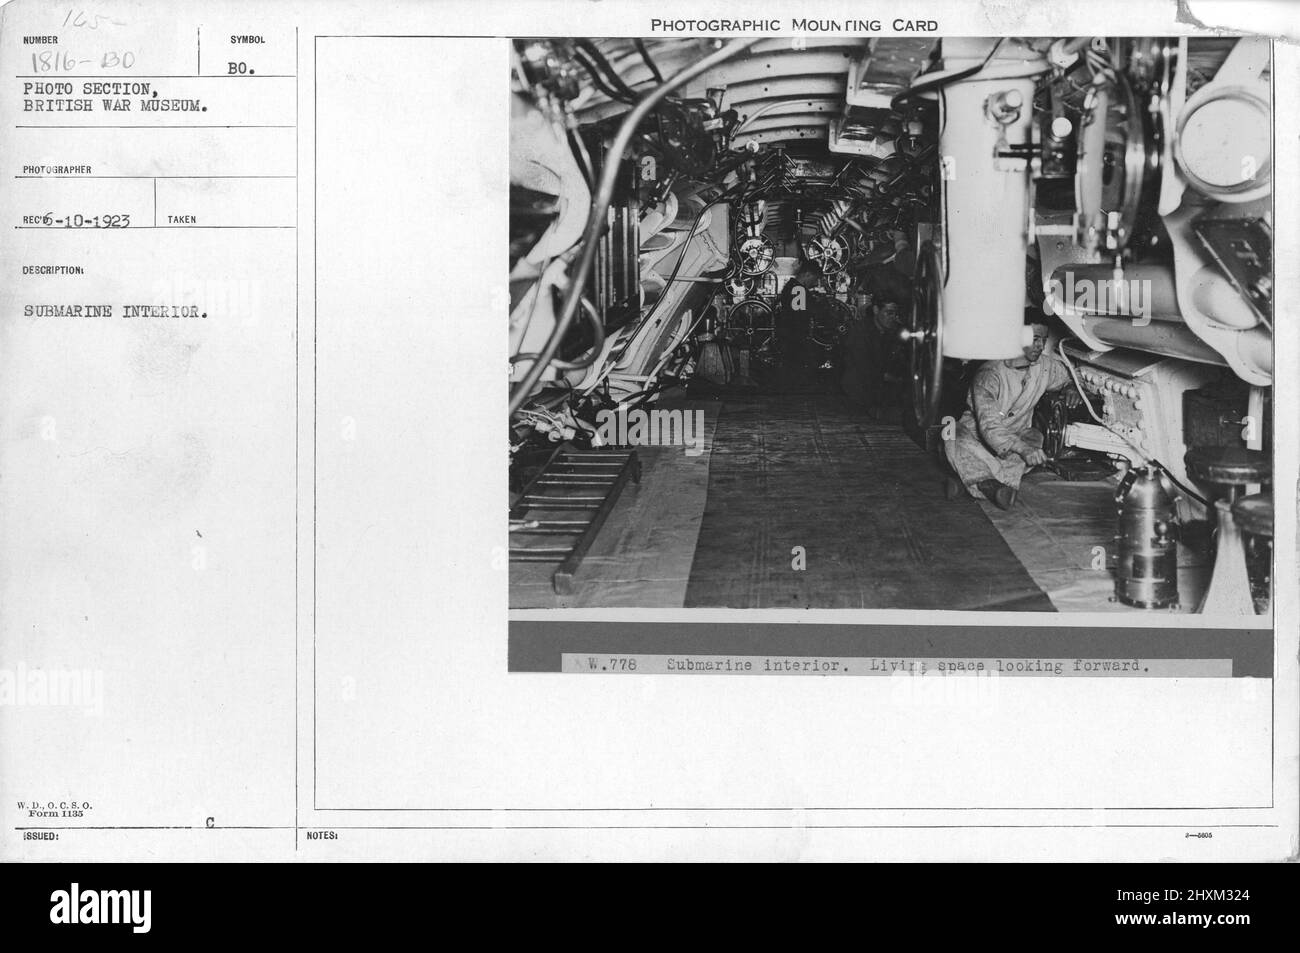 Submarine interior. Collection of World War I Photographs, 1914-1918 that depict the military activities of British and other nation's armed forces and personnel during World War I. Stock Photo